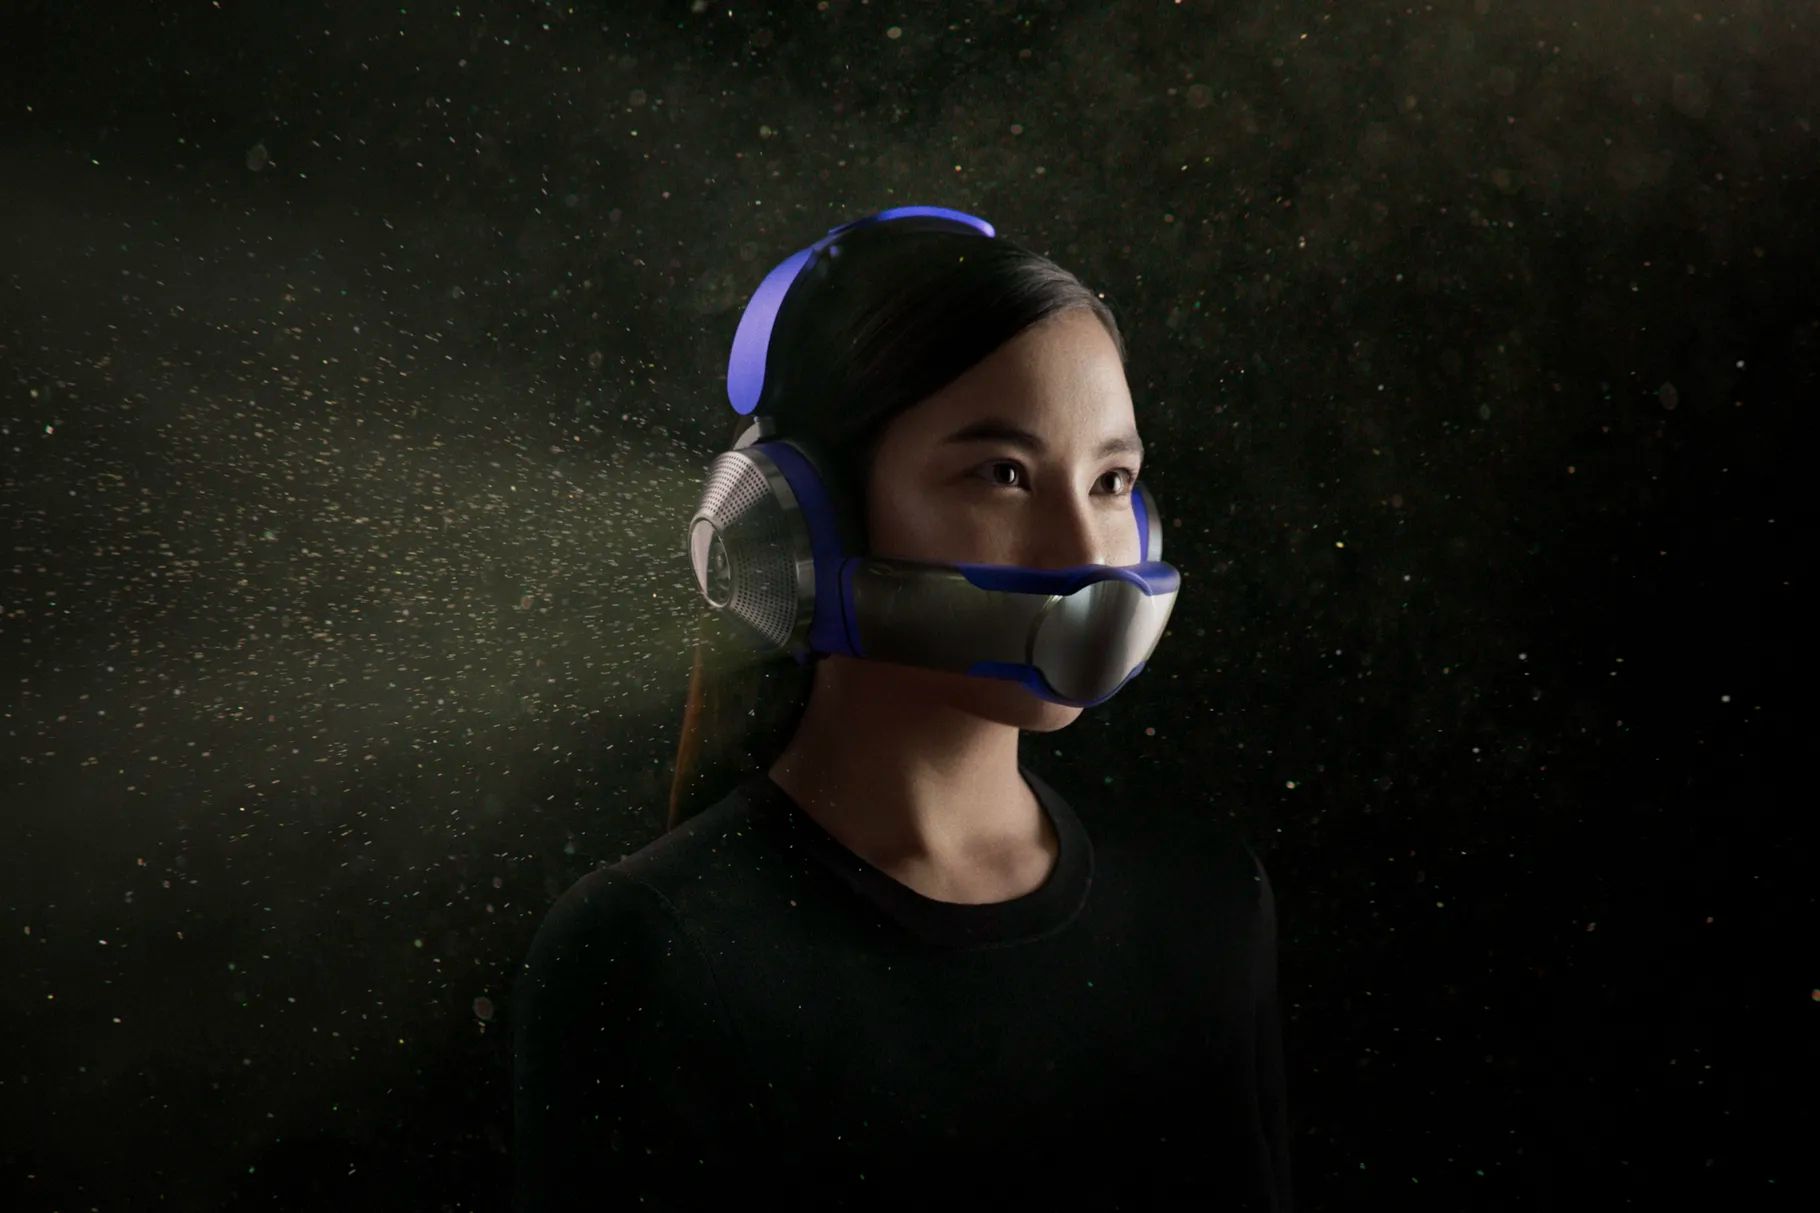 dyson zone headphones pollutants moving into filters